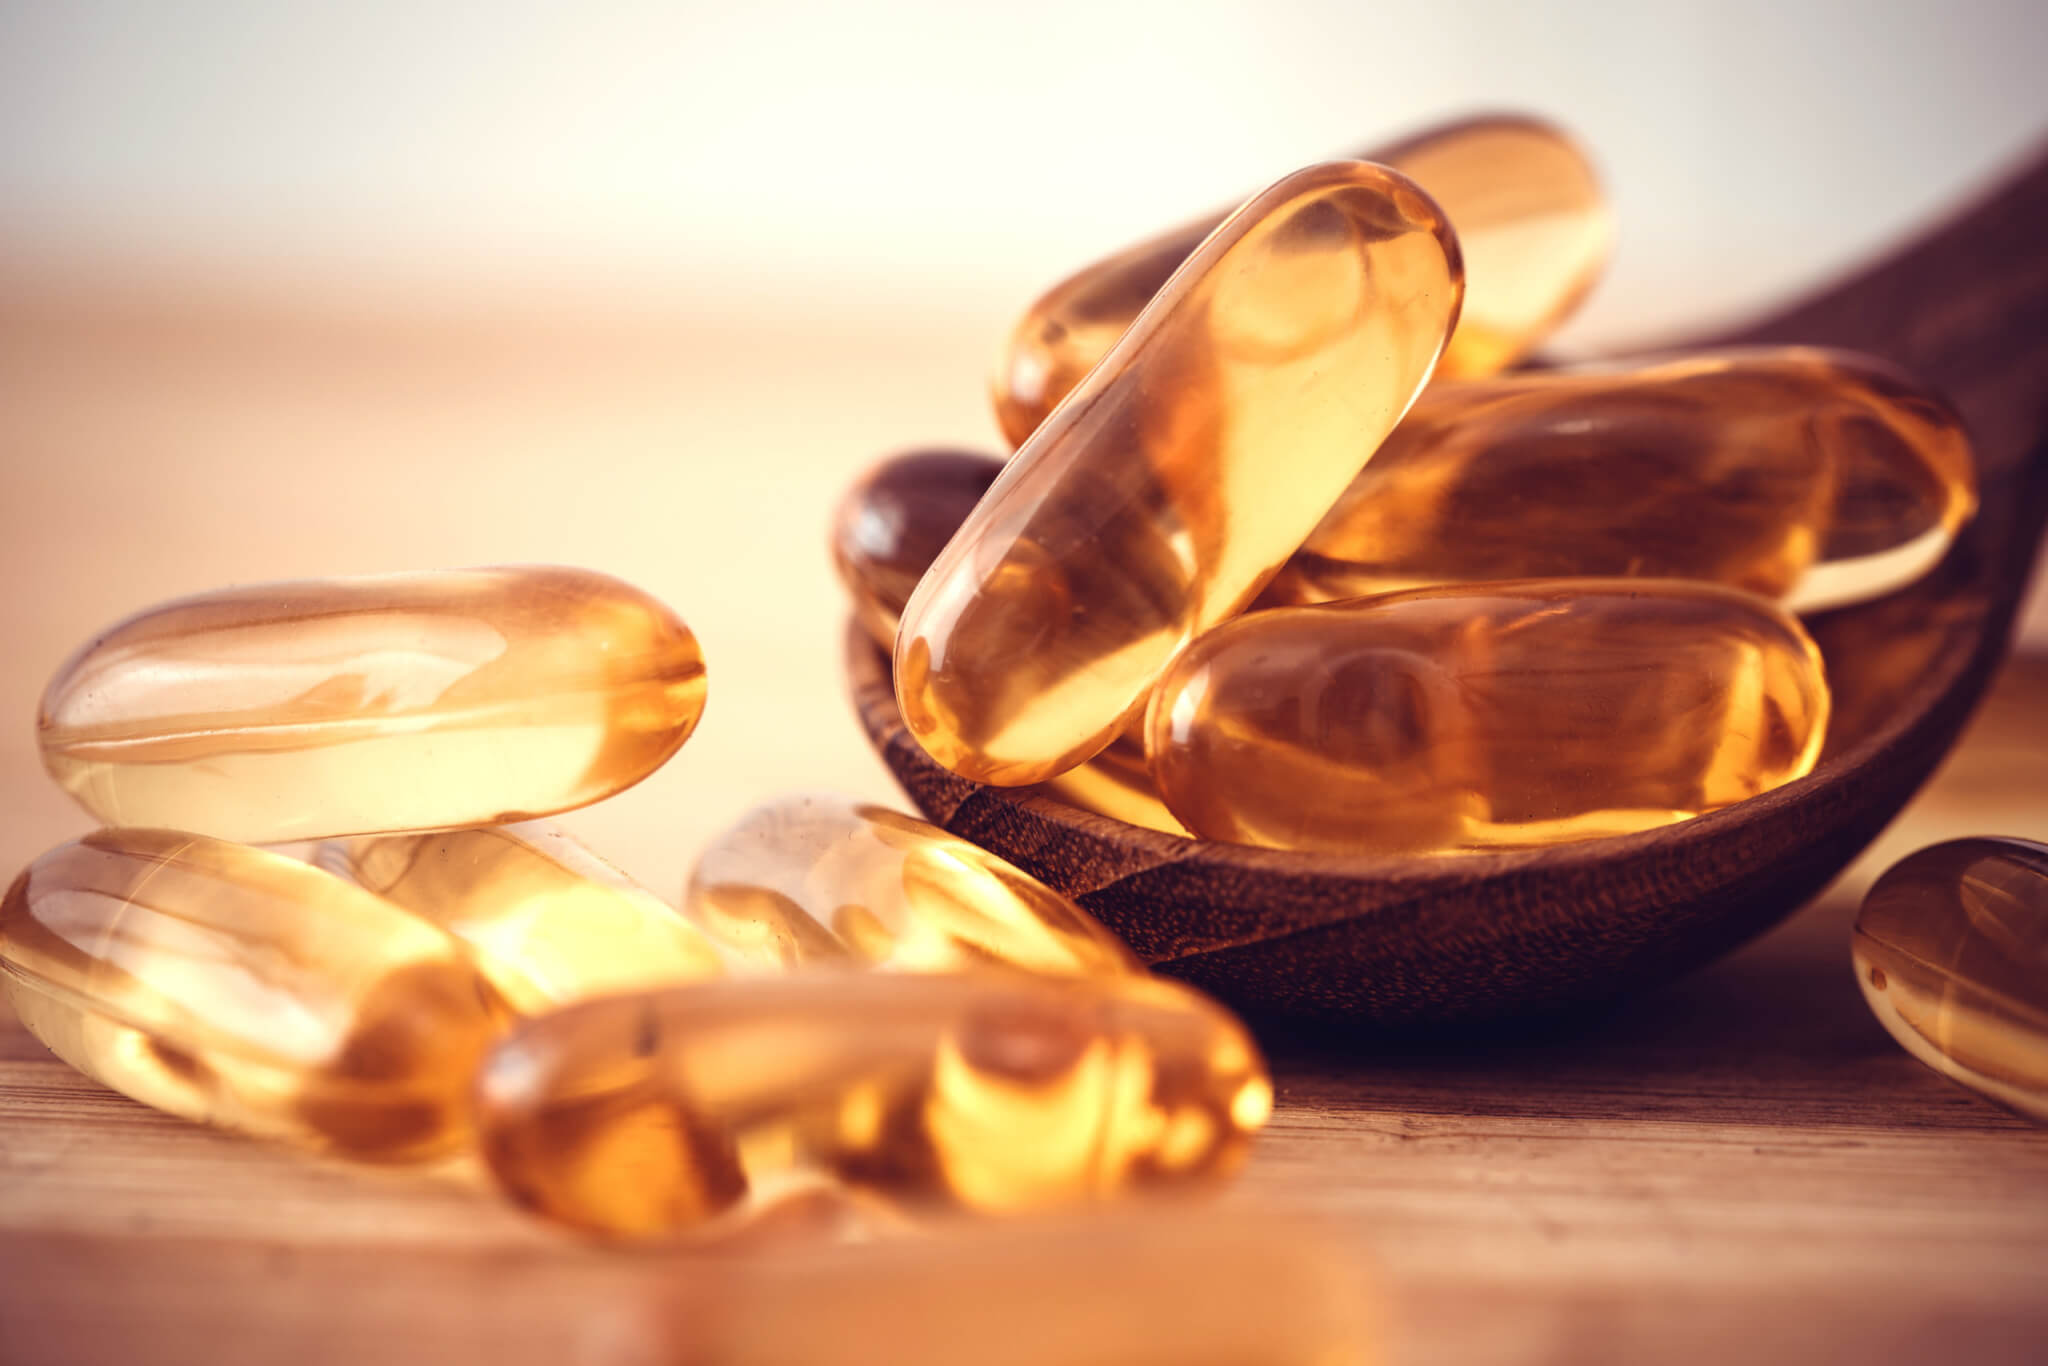 Fish oil or Vitamin D supplement